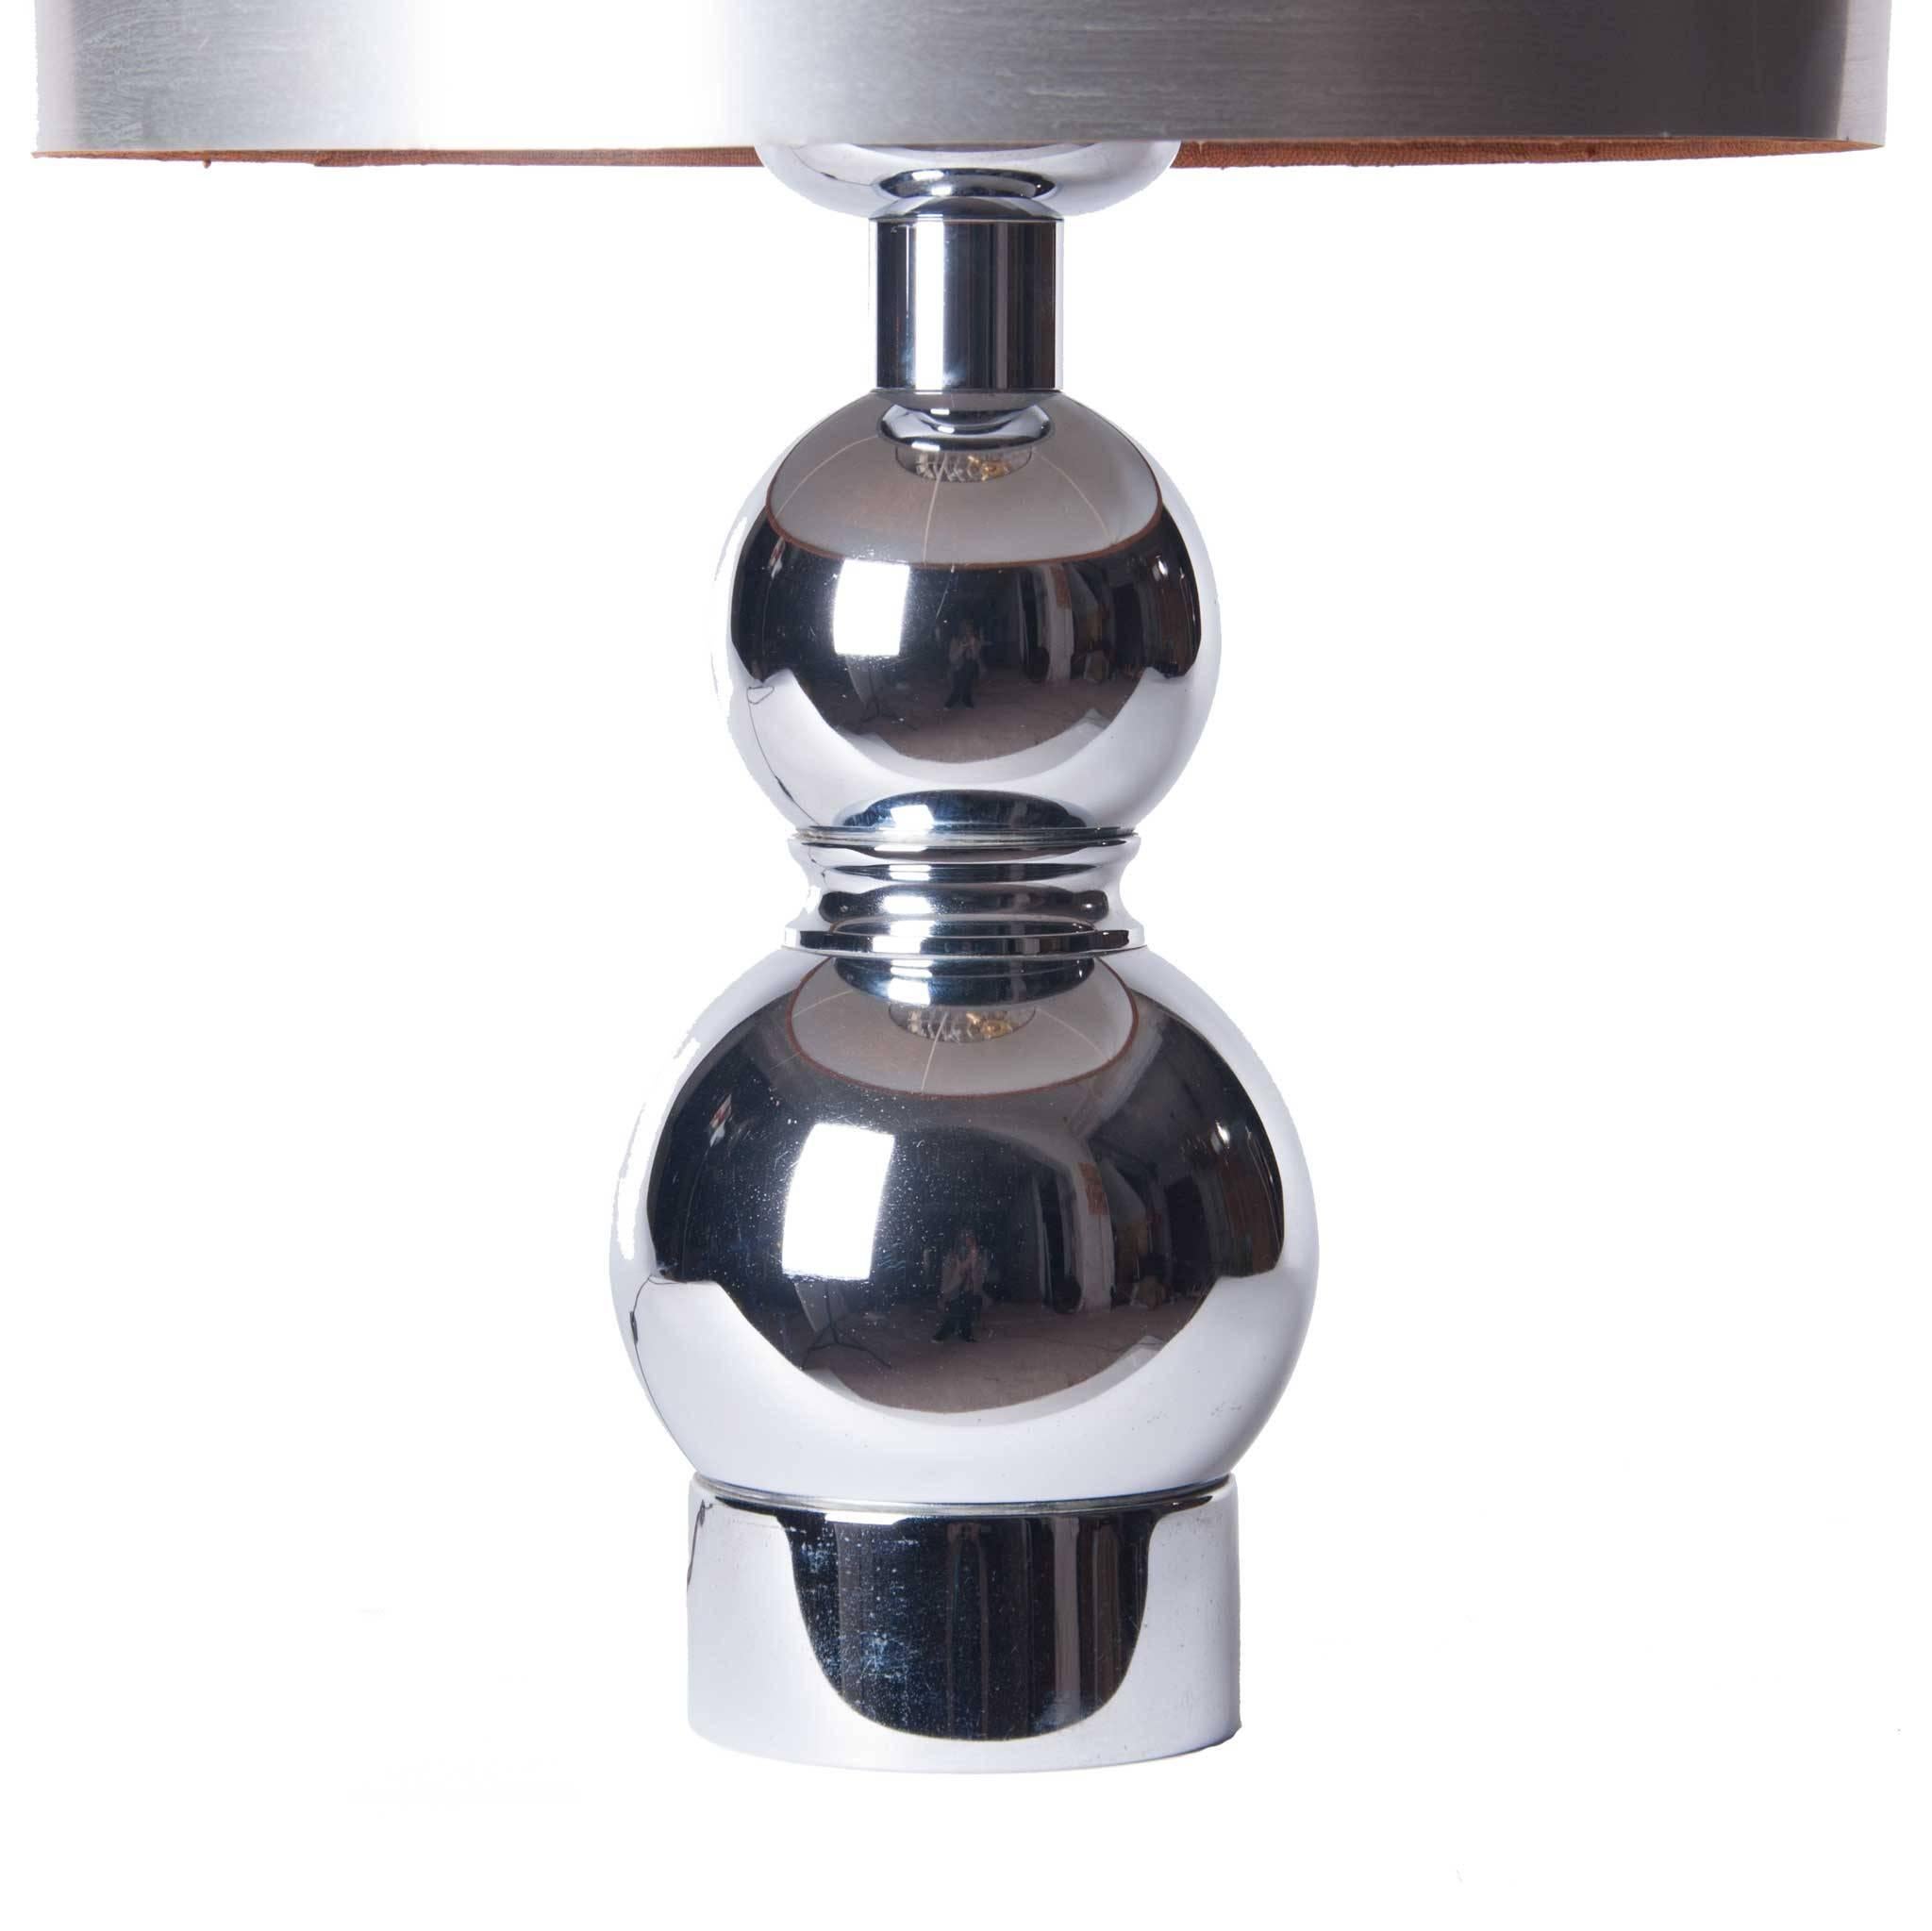 Stunning table lamp with chrome stand. Over the years the shade on the photo is no longer what it used to be. 